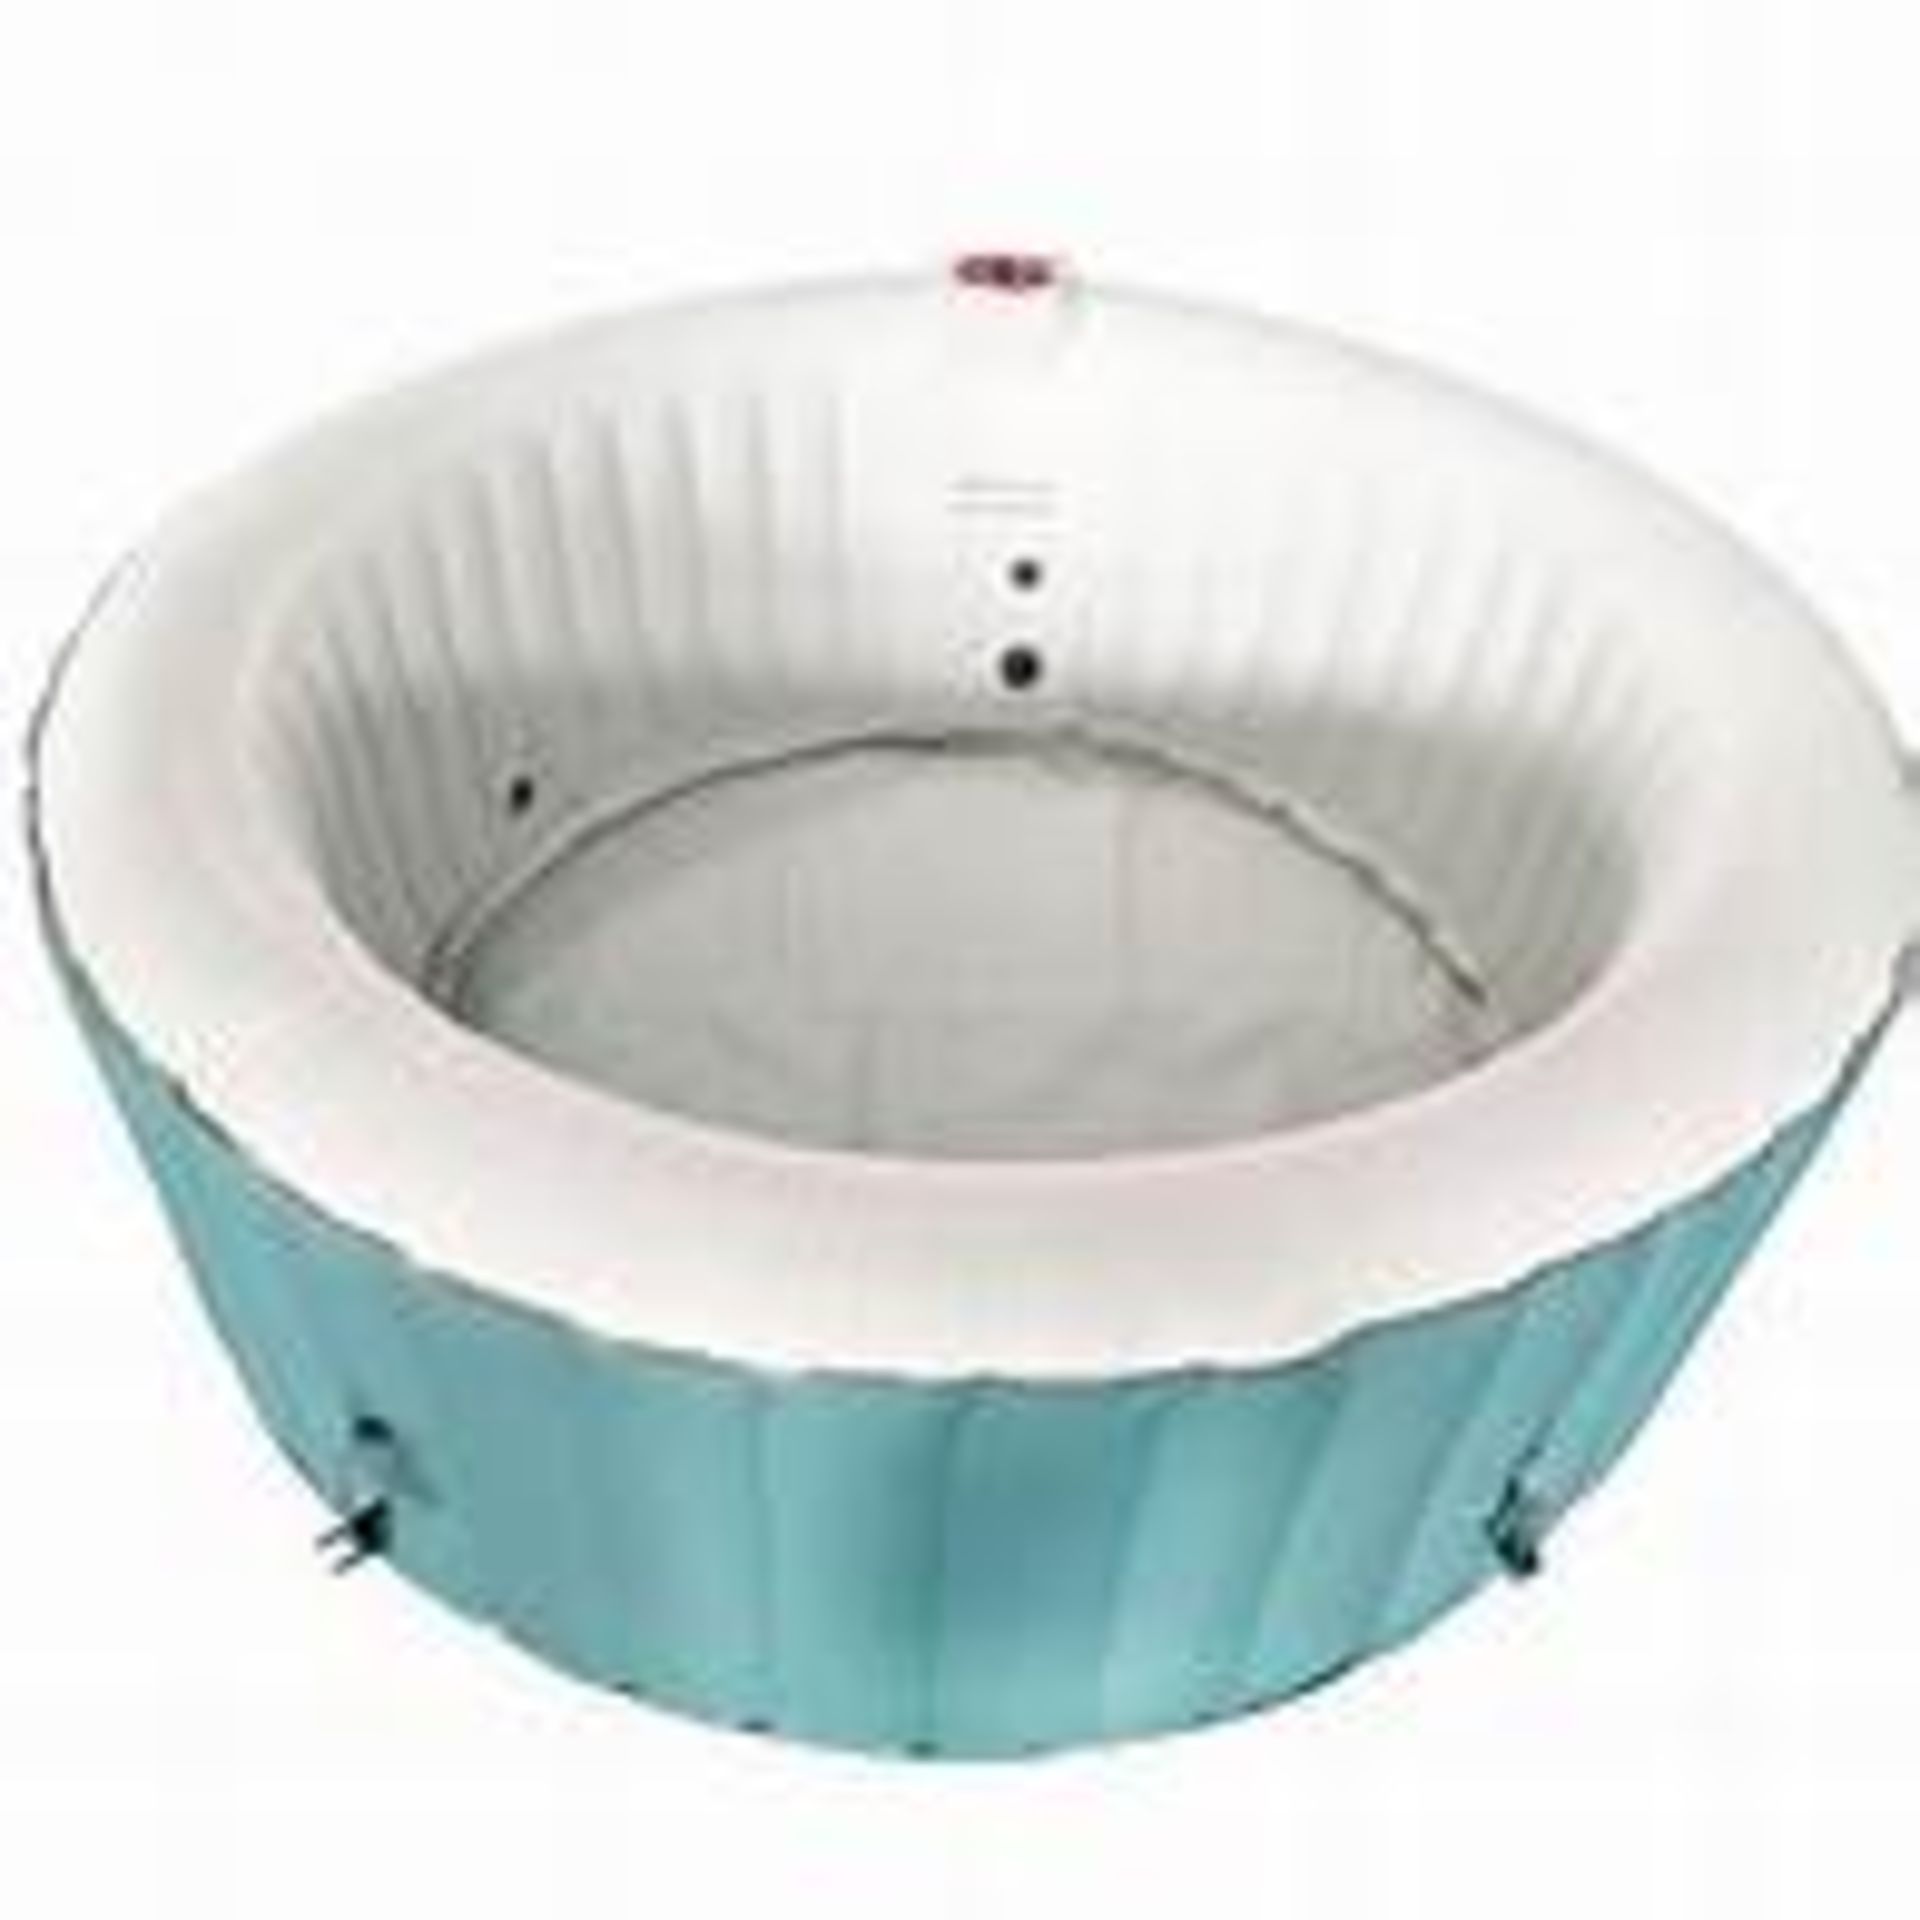 1 X USED 6 SEATER ROUND SPA IN BLUE - PLEASE NOTE THIS IS USED AND CUSTOMER RETURN - Image 2 of 2